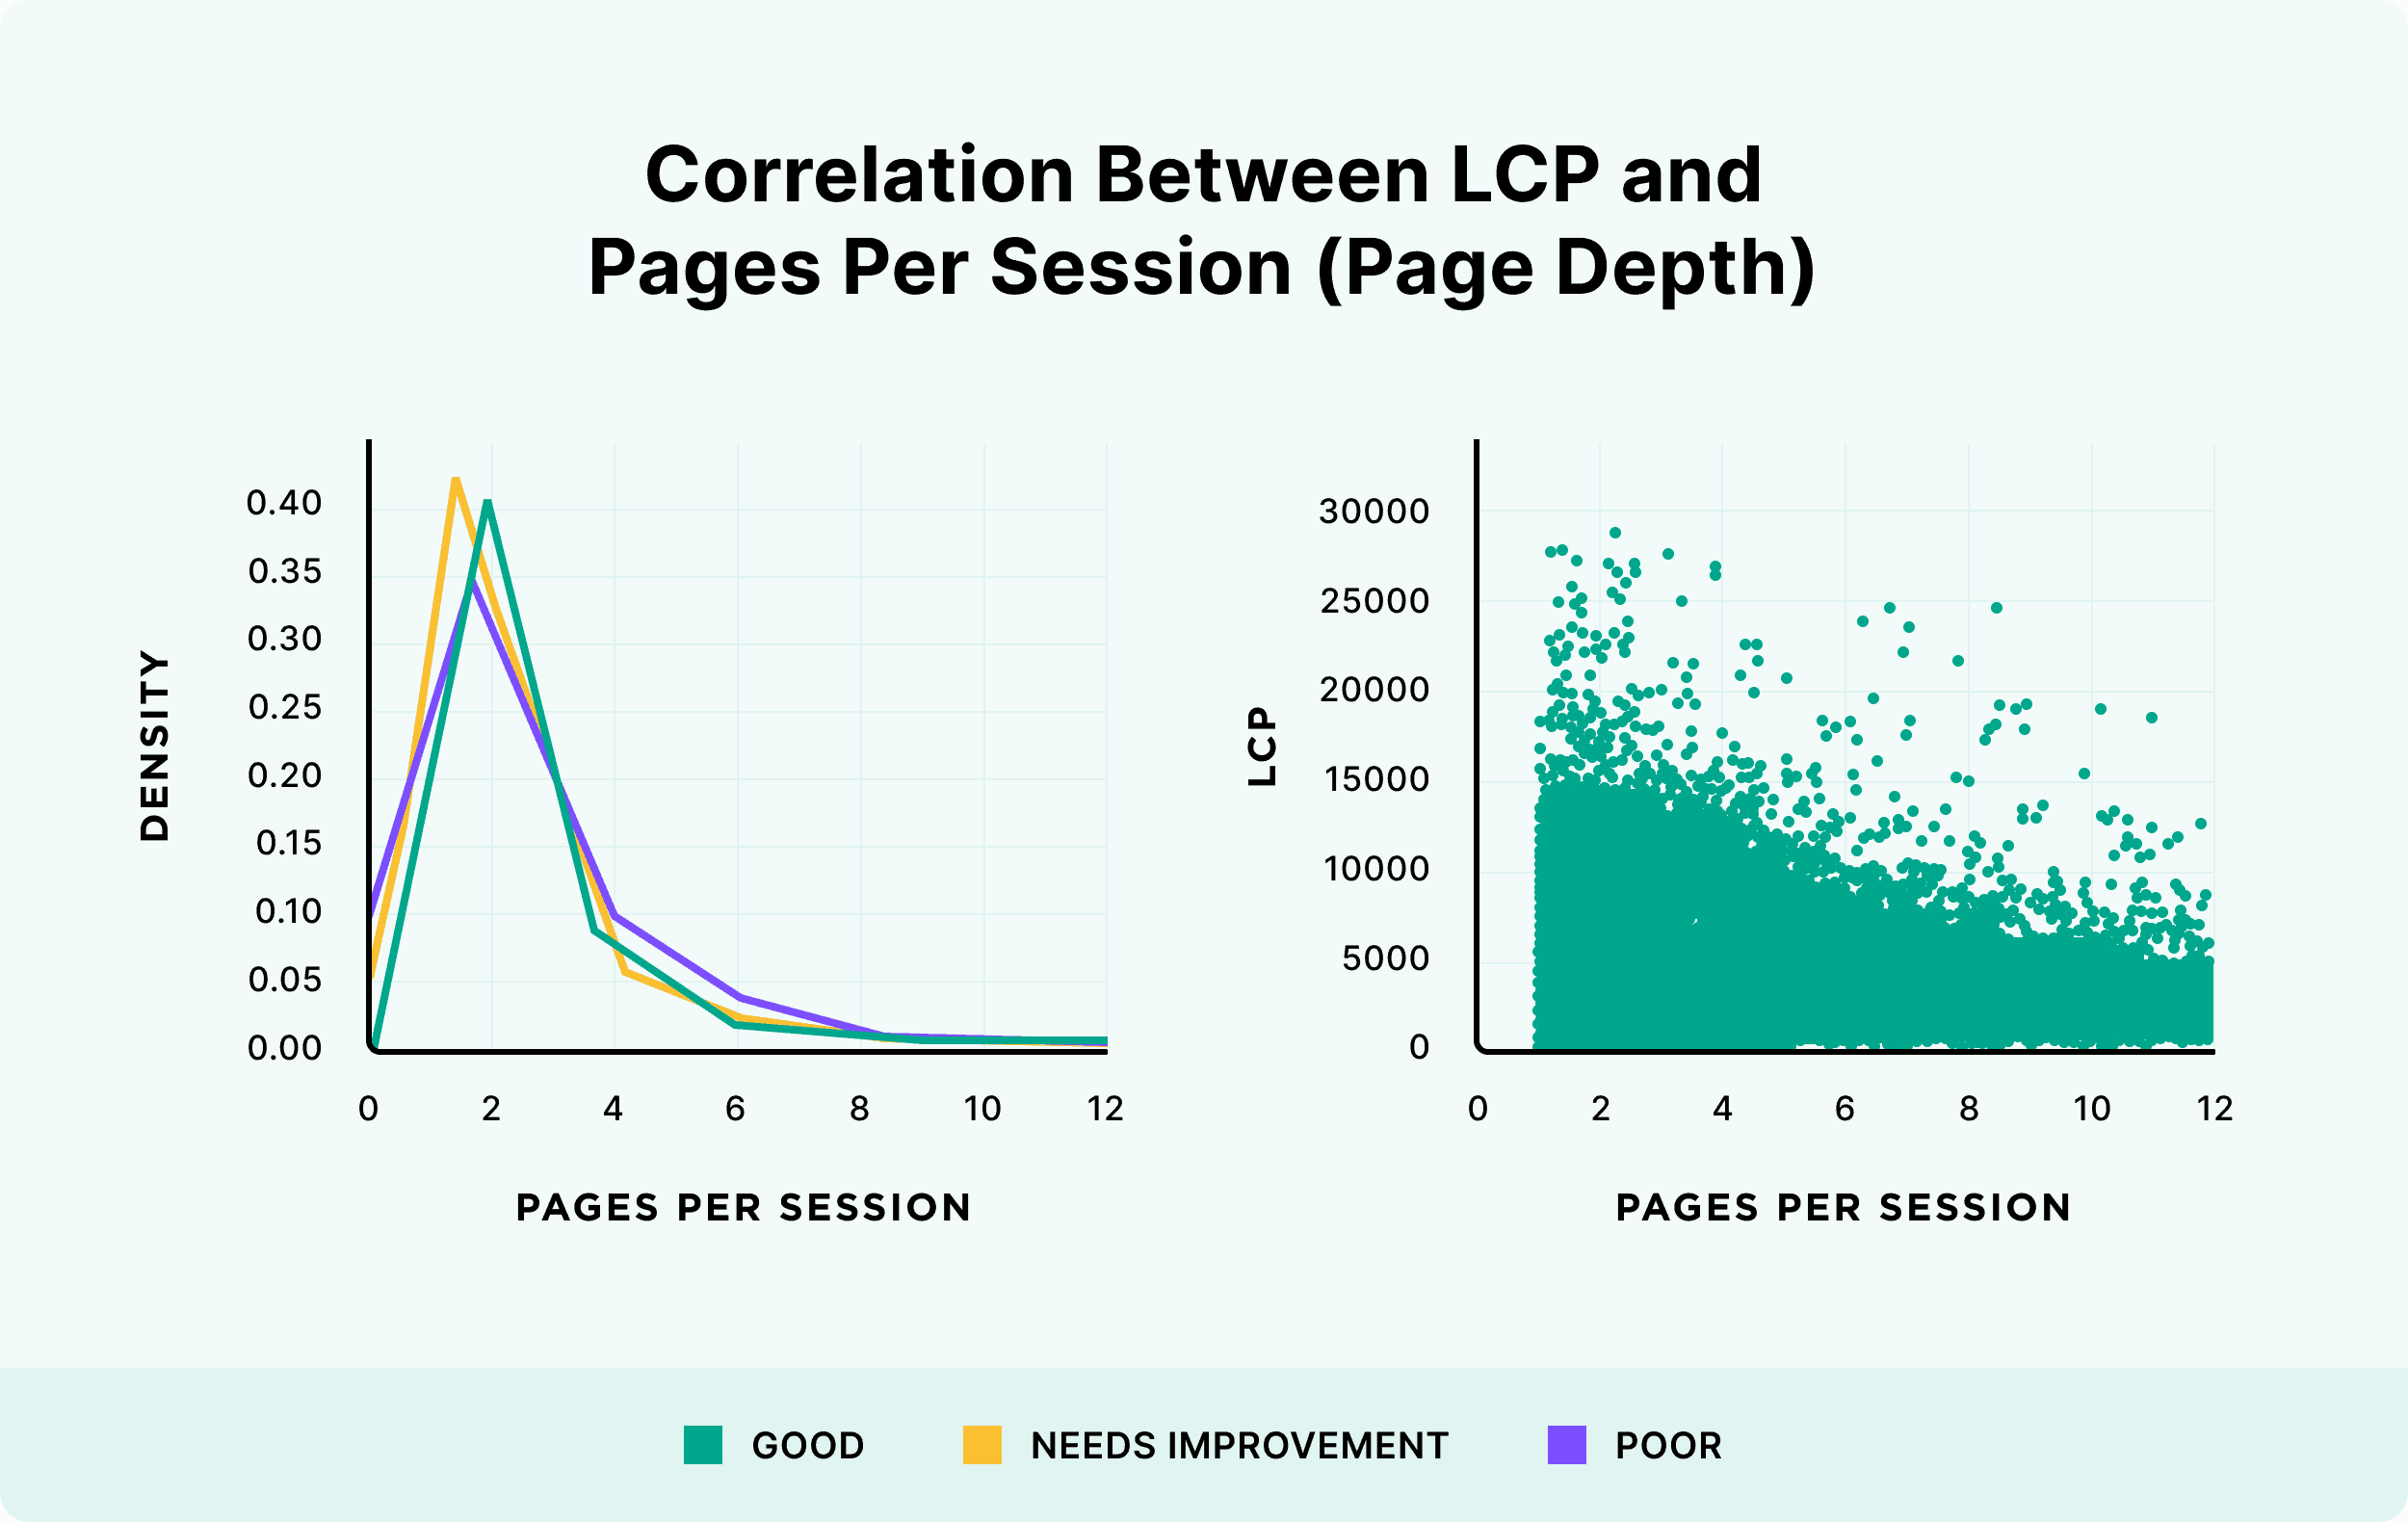 Correlation between LCP and pages per session